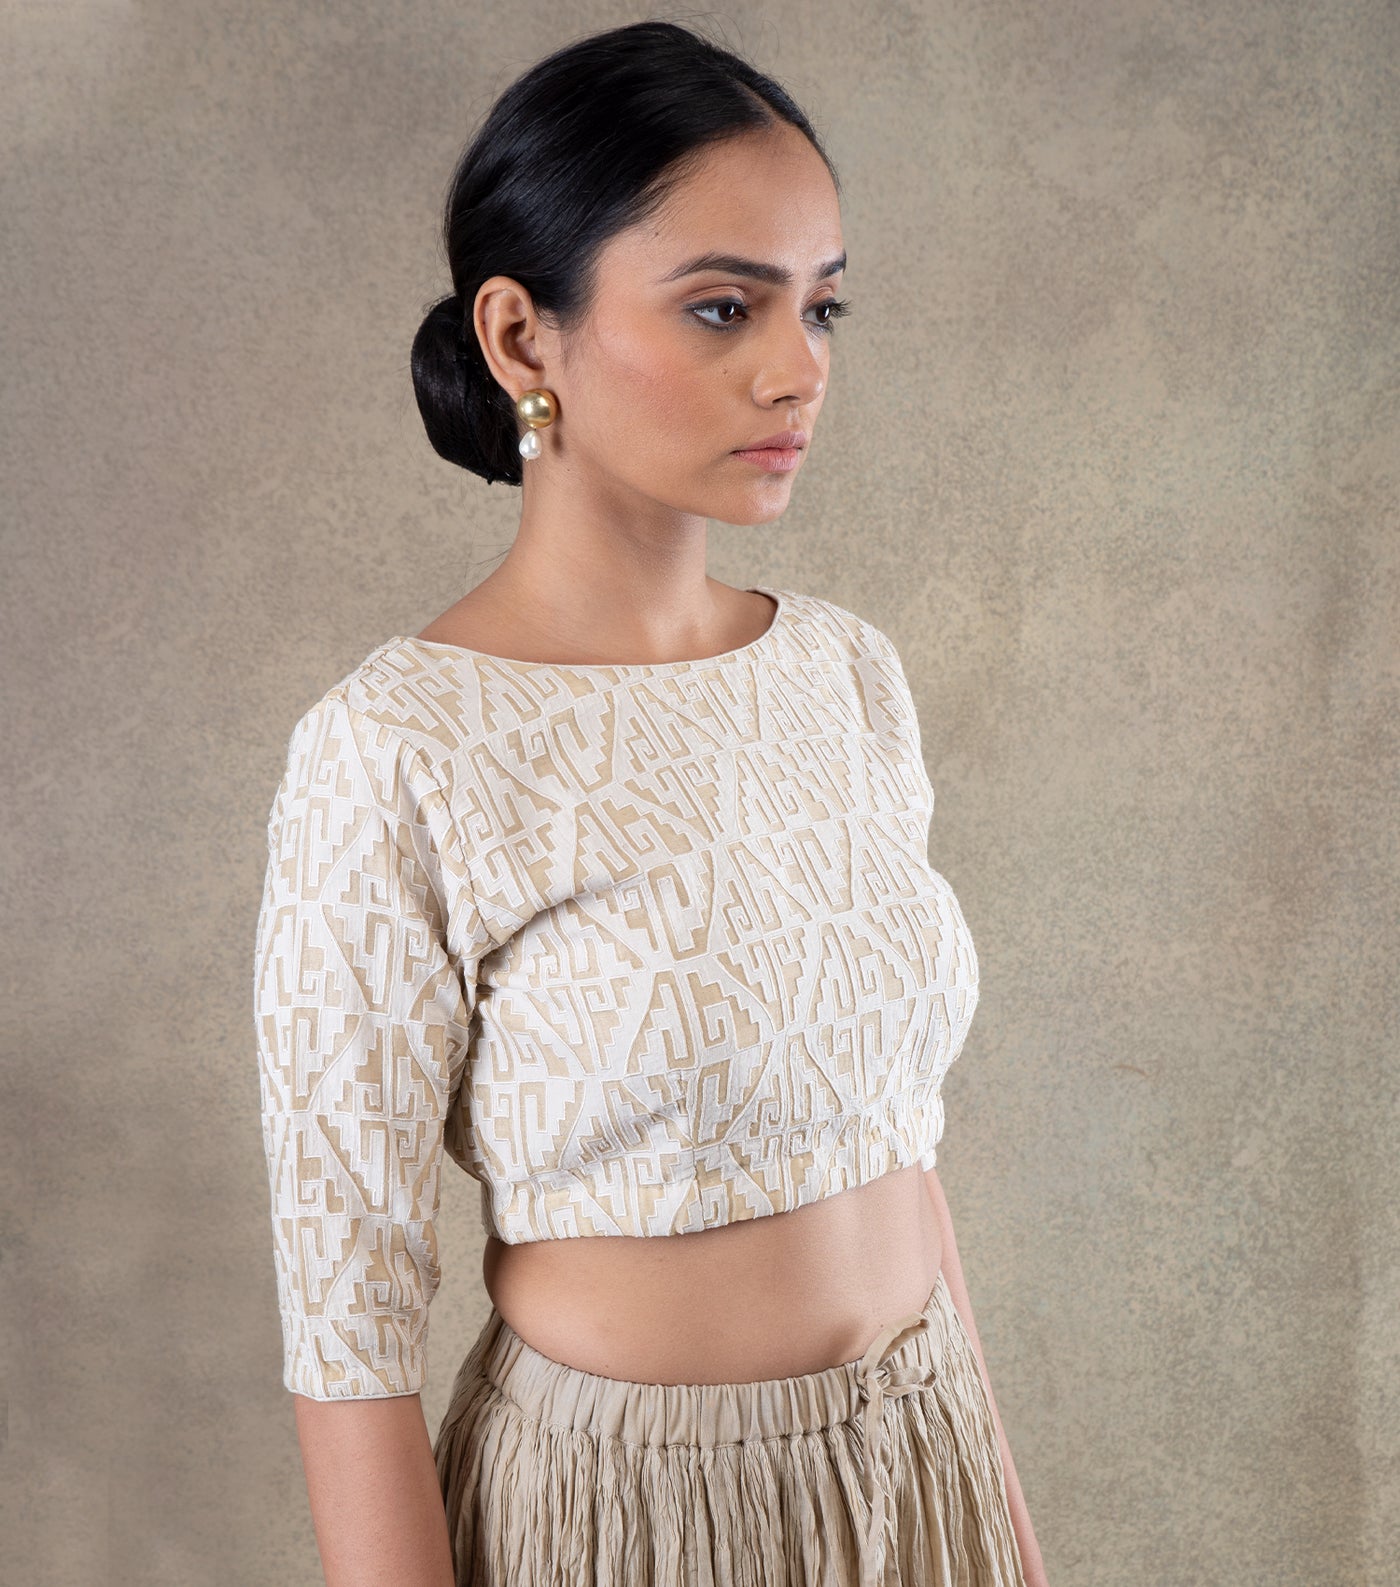 Ivory embroidered chanderi Blouse